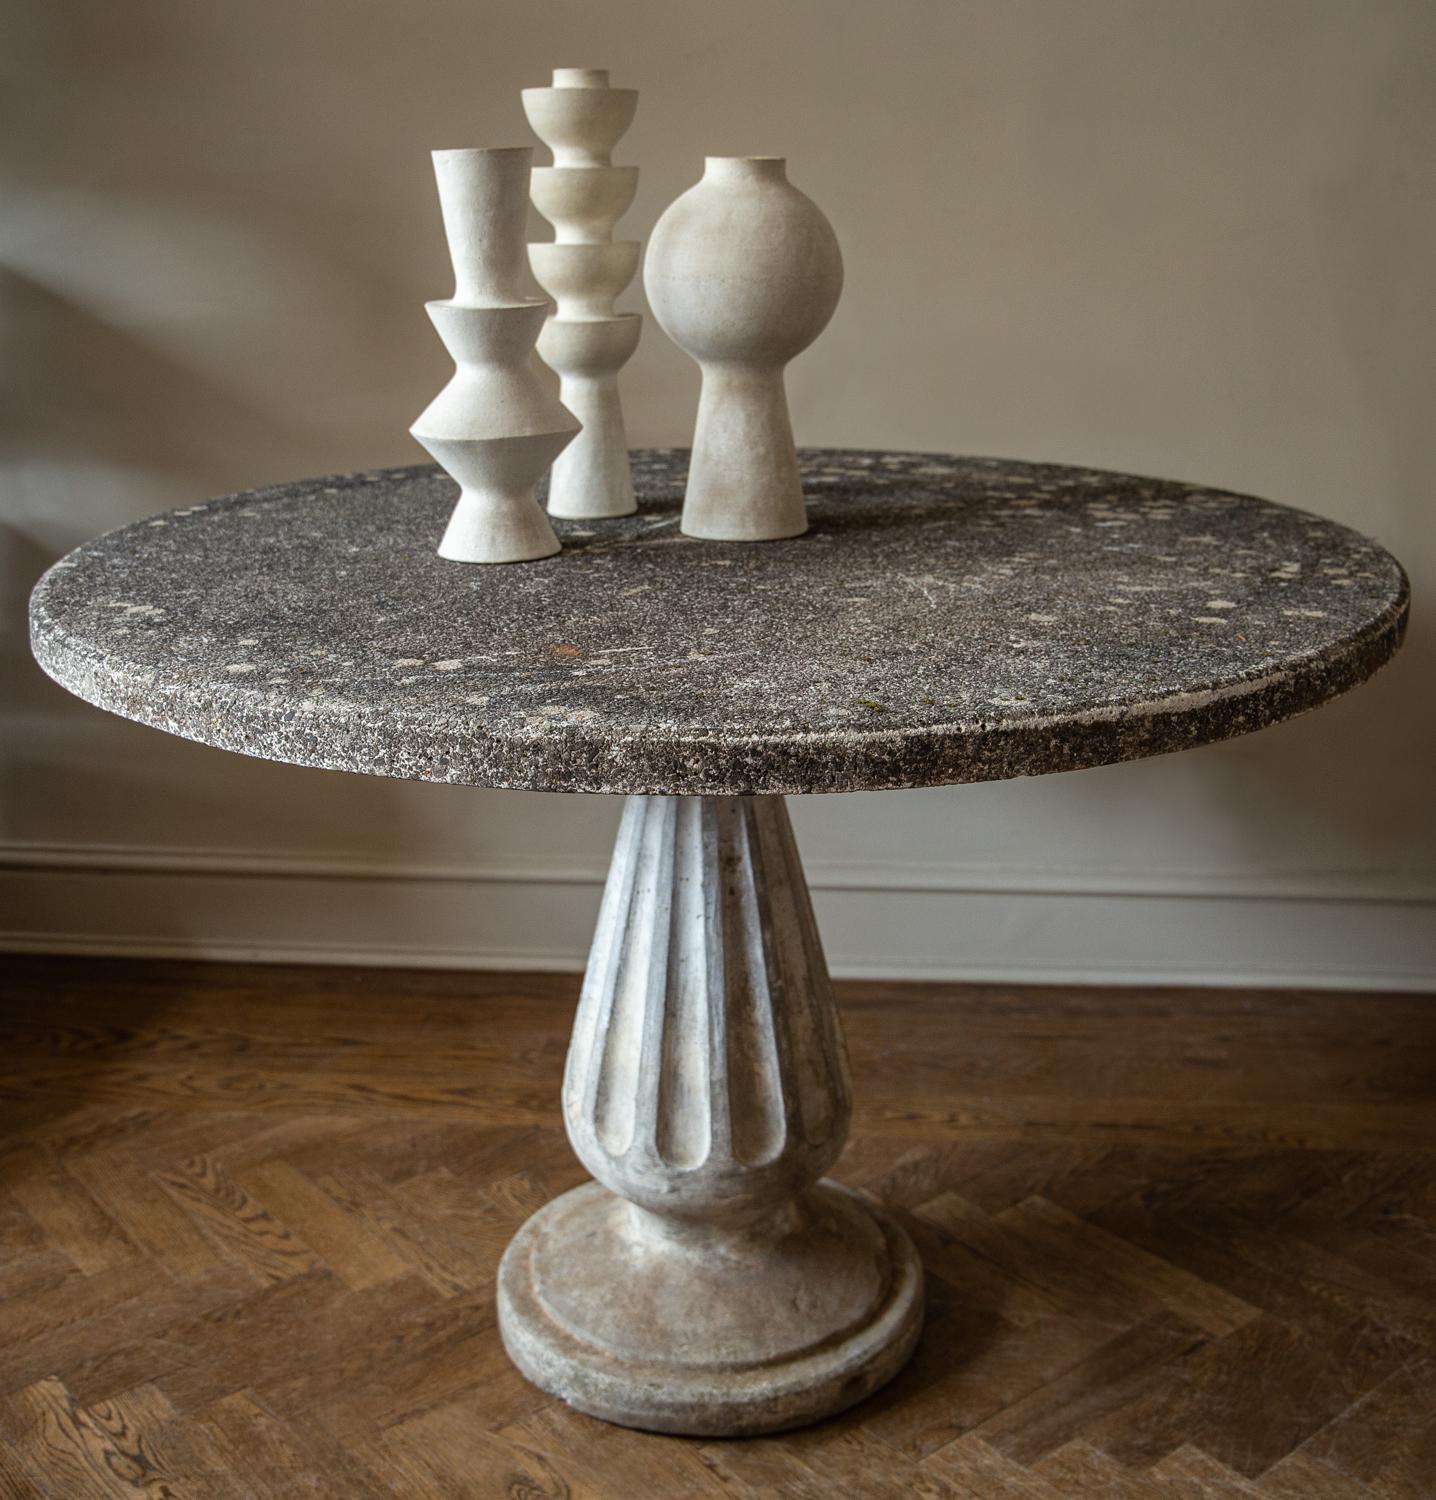 Deco meets Brutalism - an early example of concrete furniture with both modernist and classical form. Featuring sublime table top patina, a timeless piece suitable for indoor/outdoor, circa 1940.

  